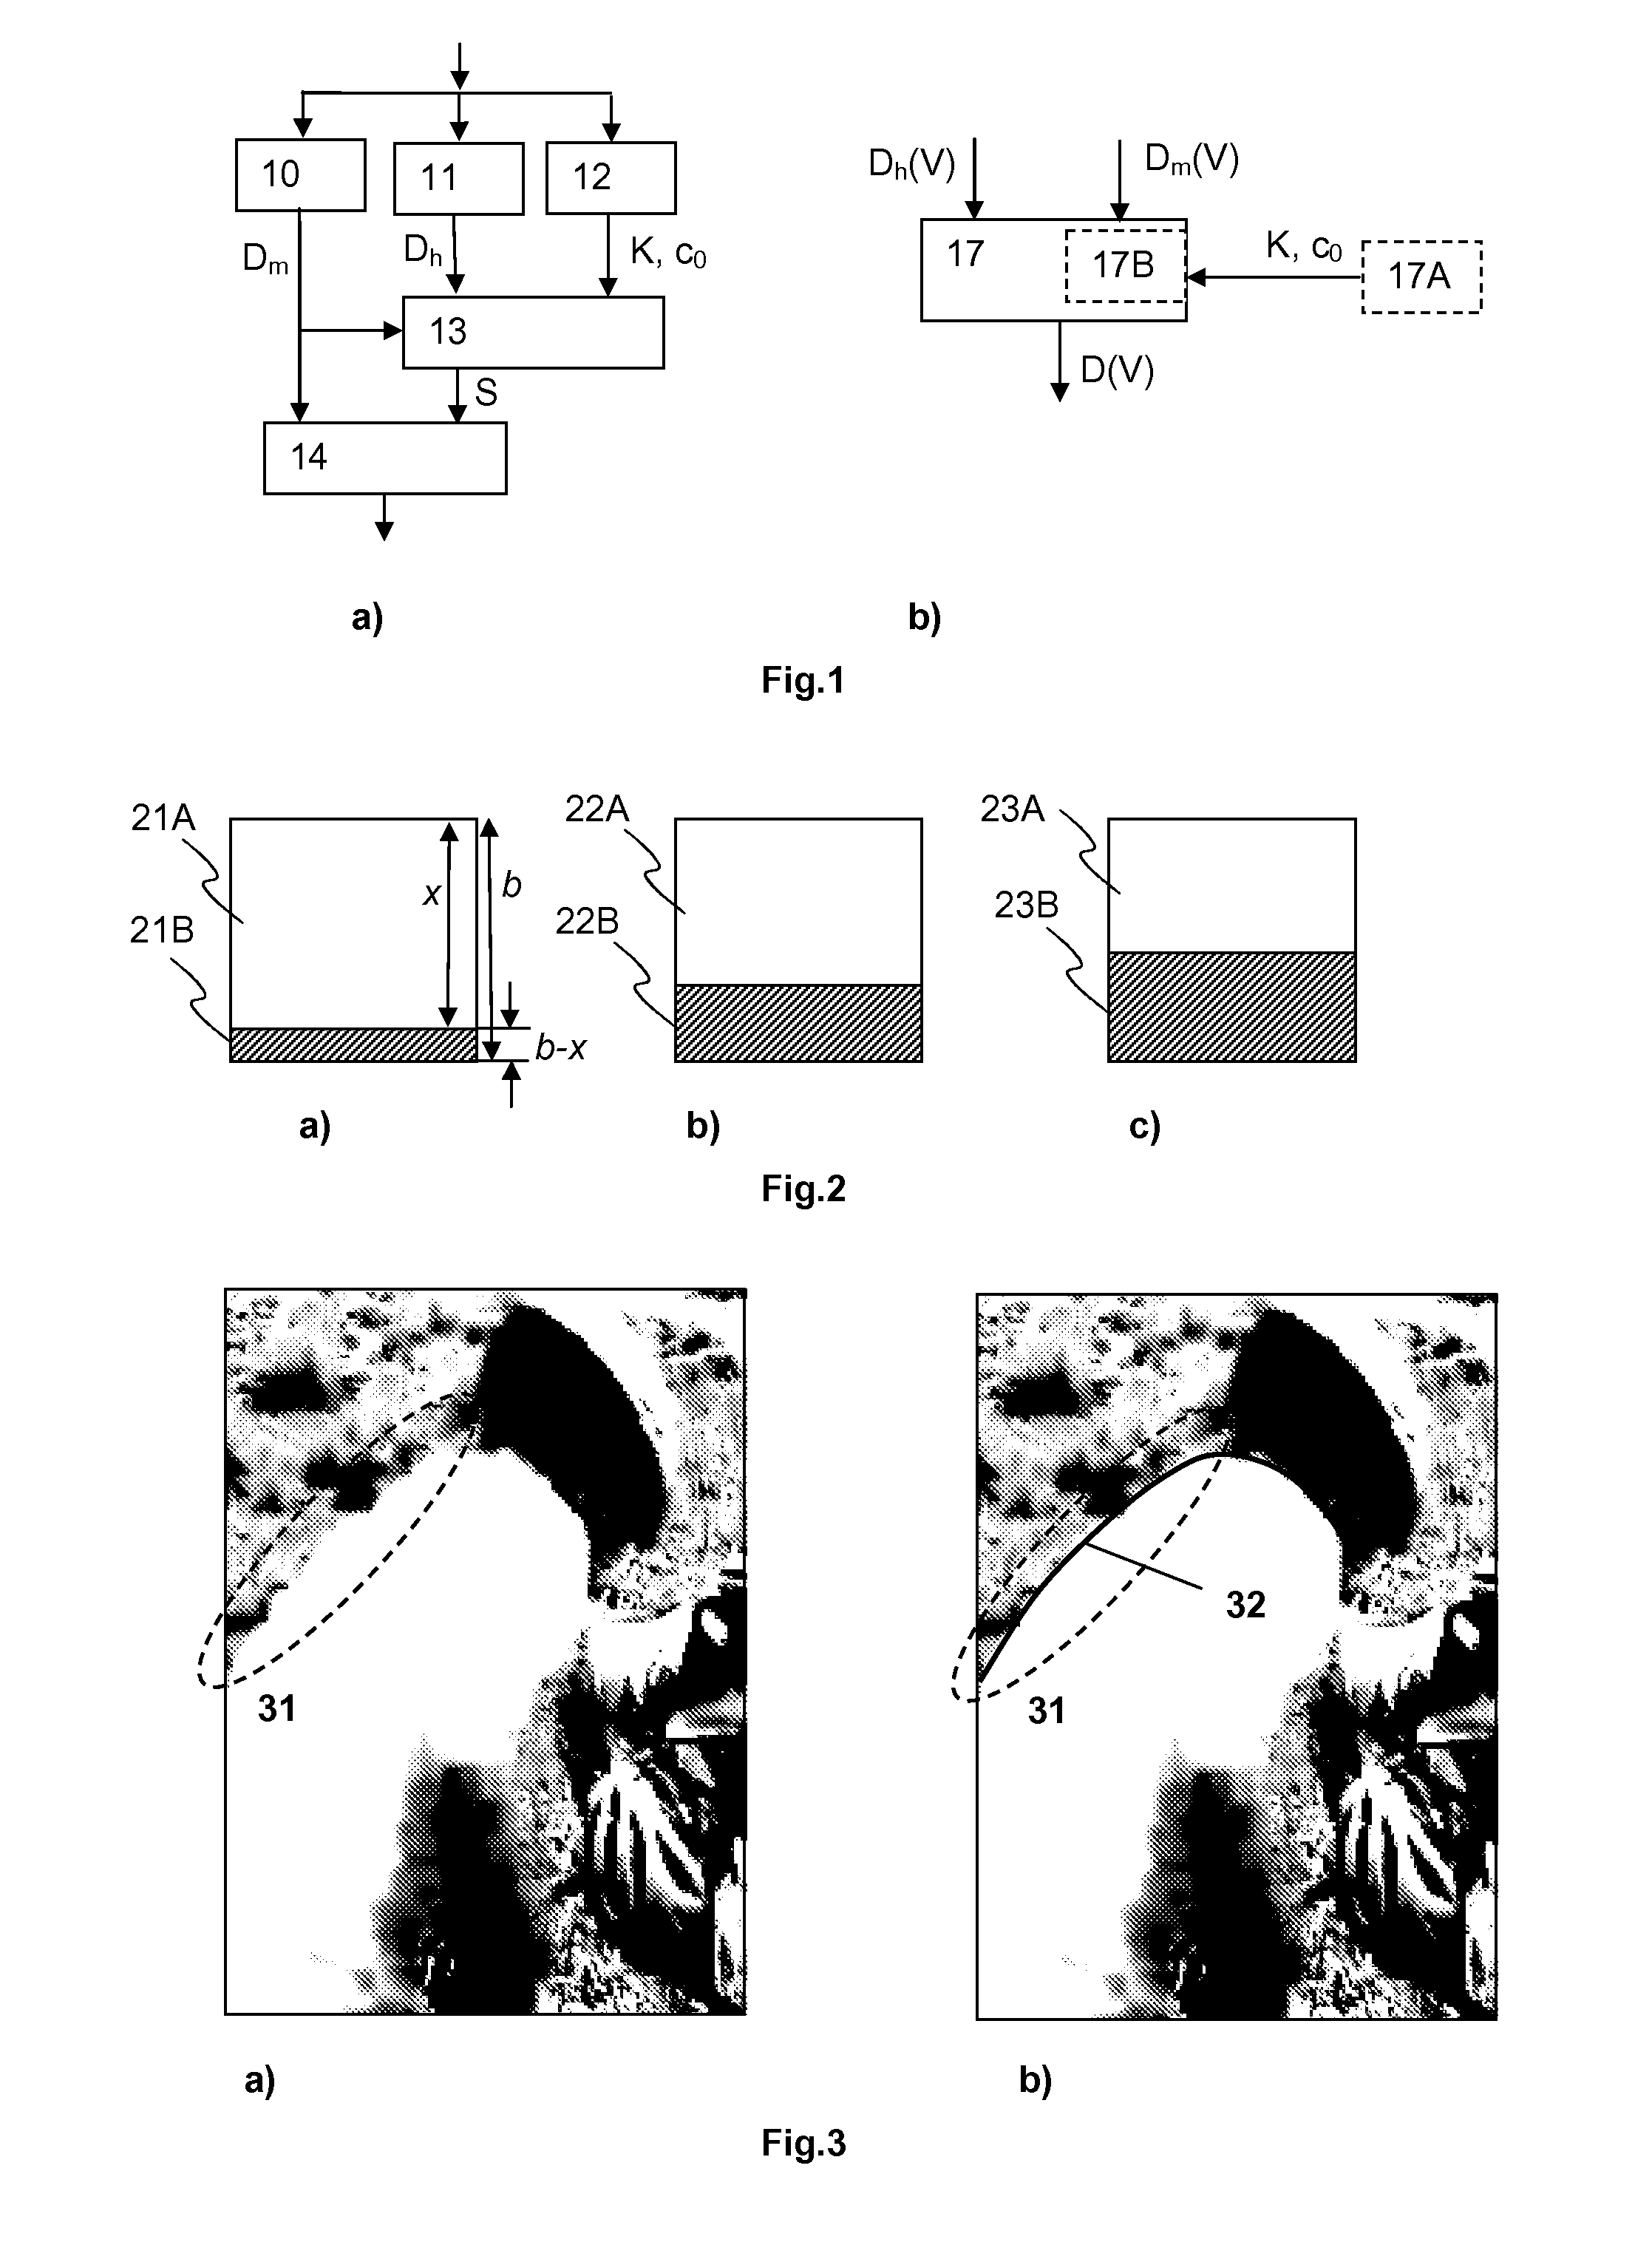 Method and device for calculating distortion of a video being affected by compression artifacts and channel artifacts